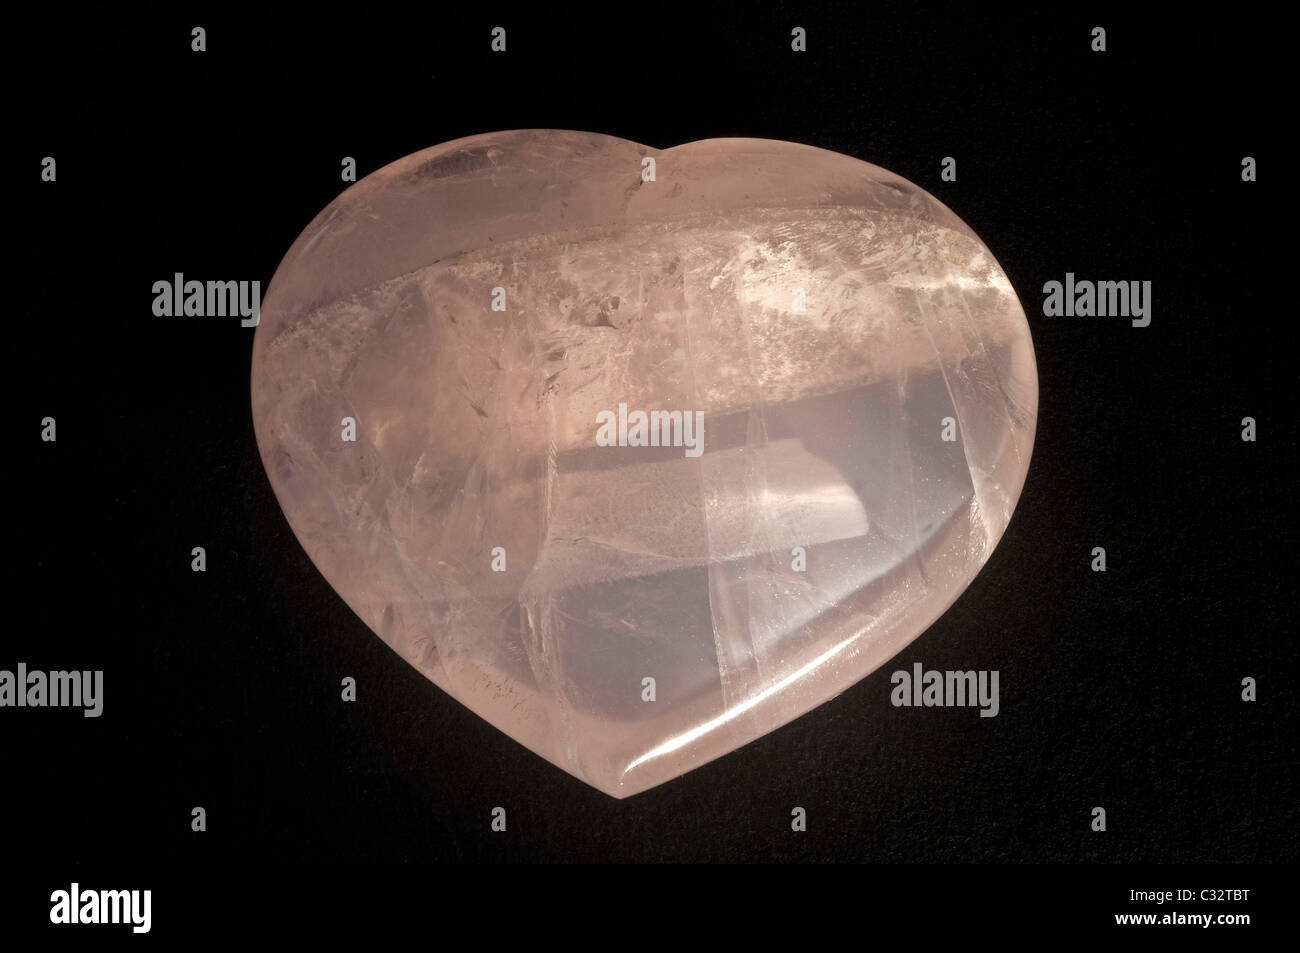 Heart made of Rose Quartz, studio picture against a blue background. Stock Photo